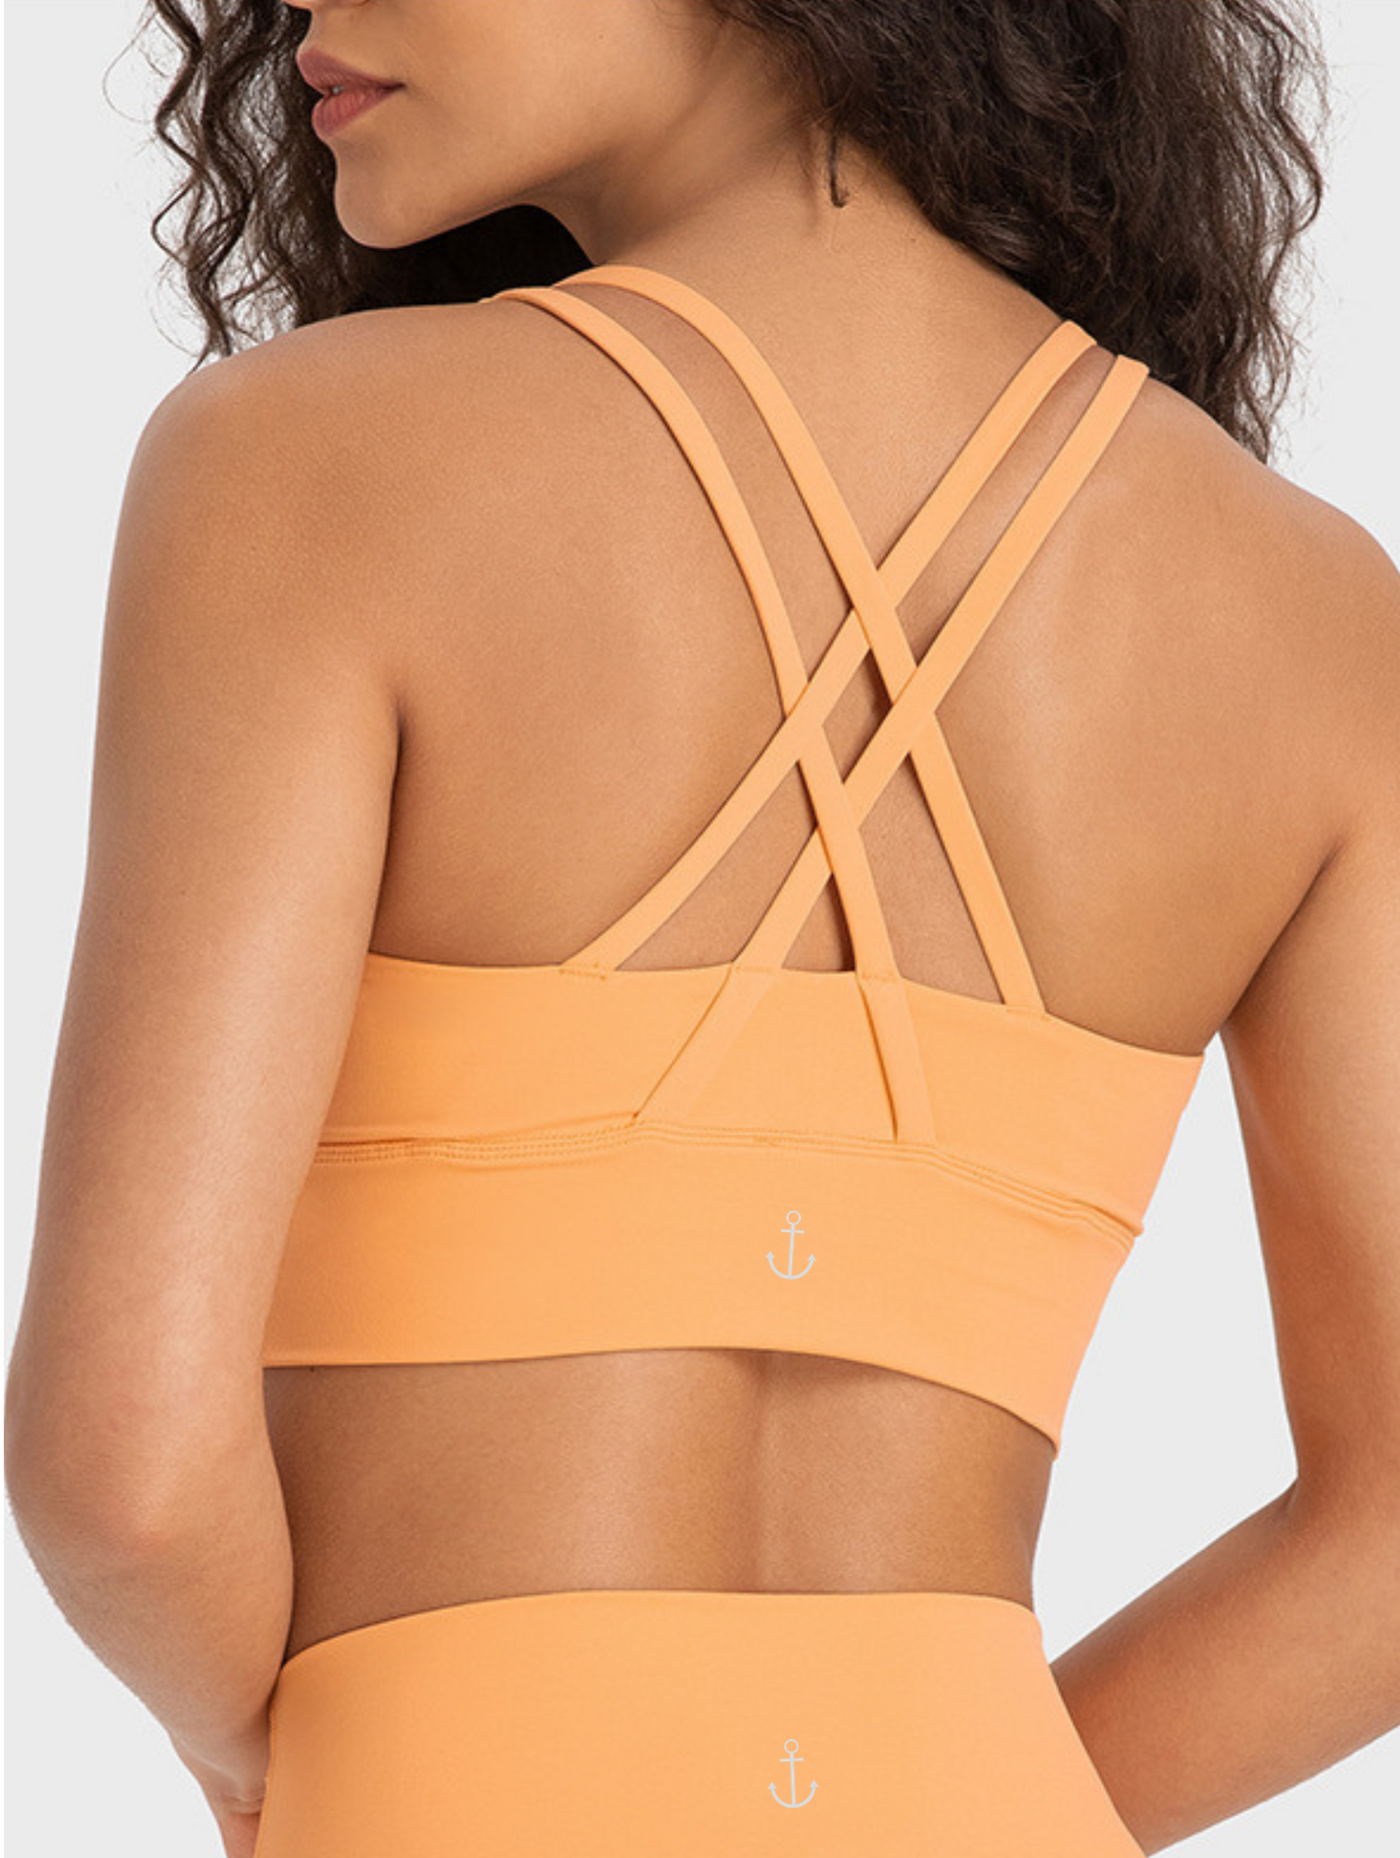 Navalora Fit Amelia Strappy Bra with Removable Pads in Tangerine Back Model View with Anchor Logo